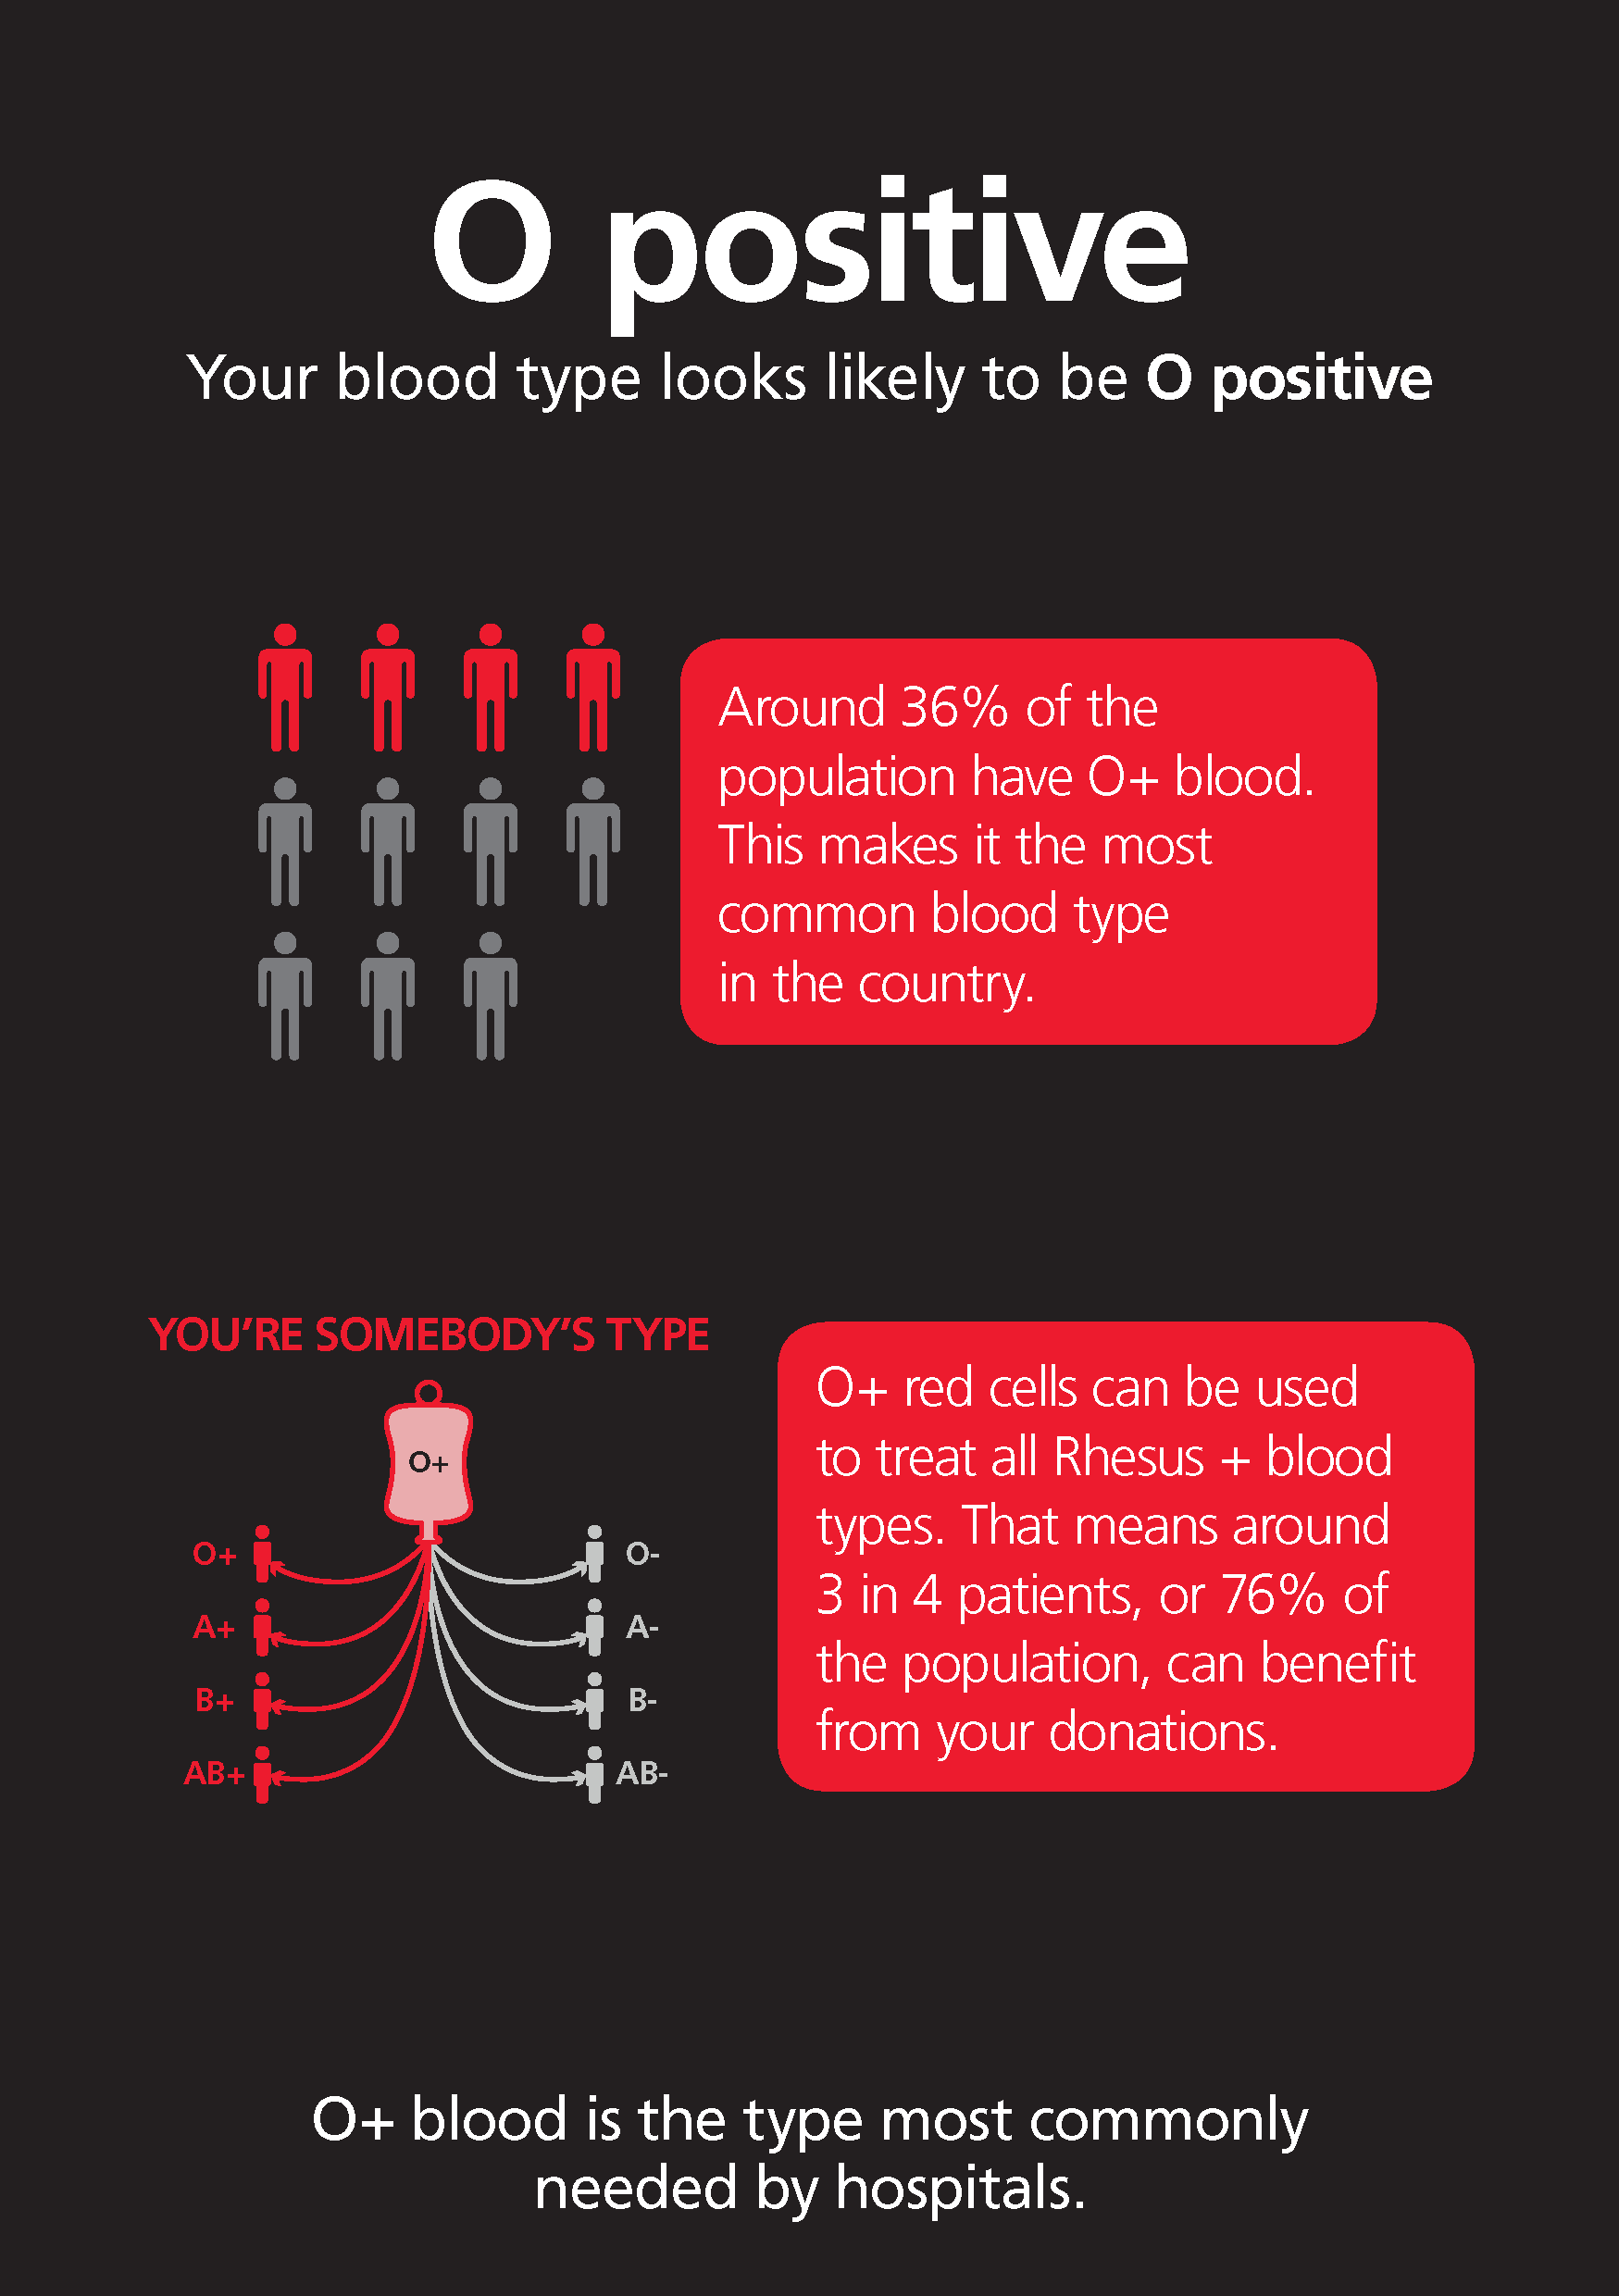 What's your blood type? - NHS Blood and Transplant